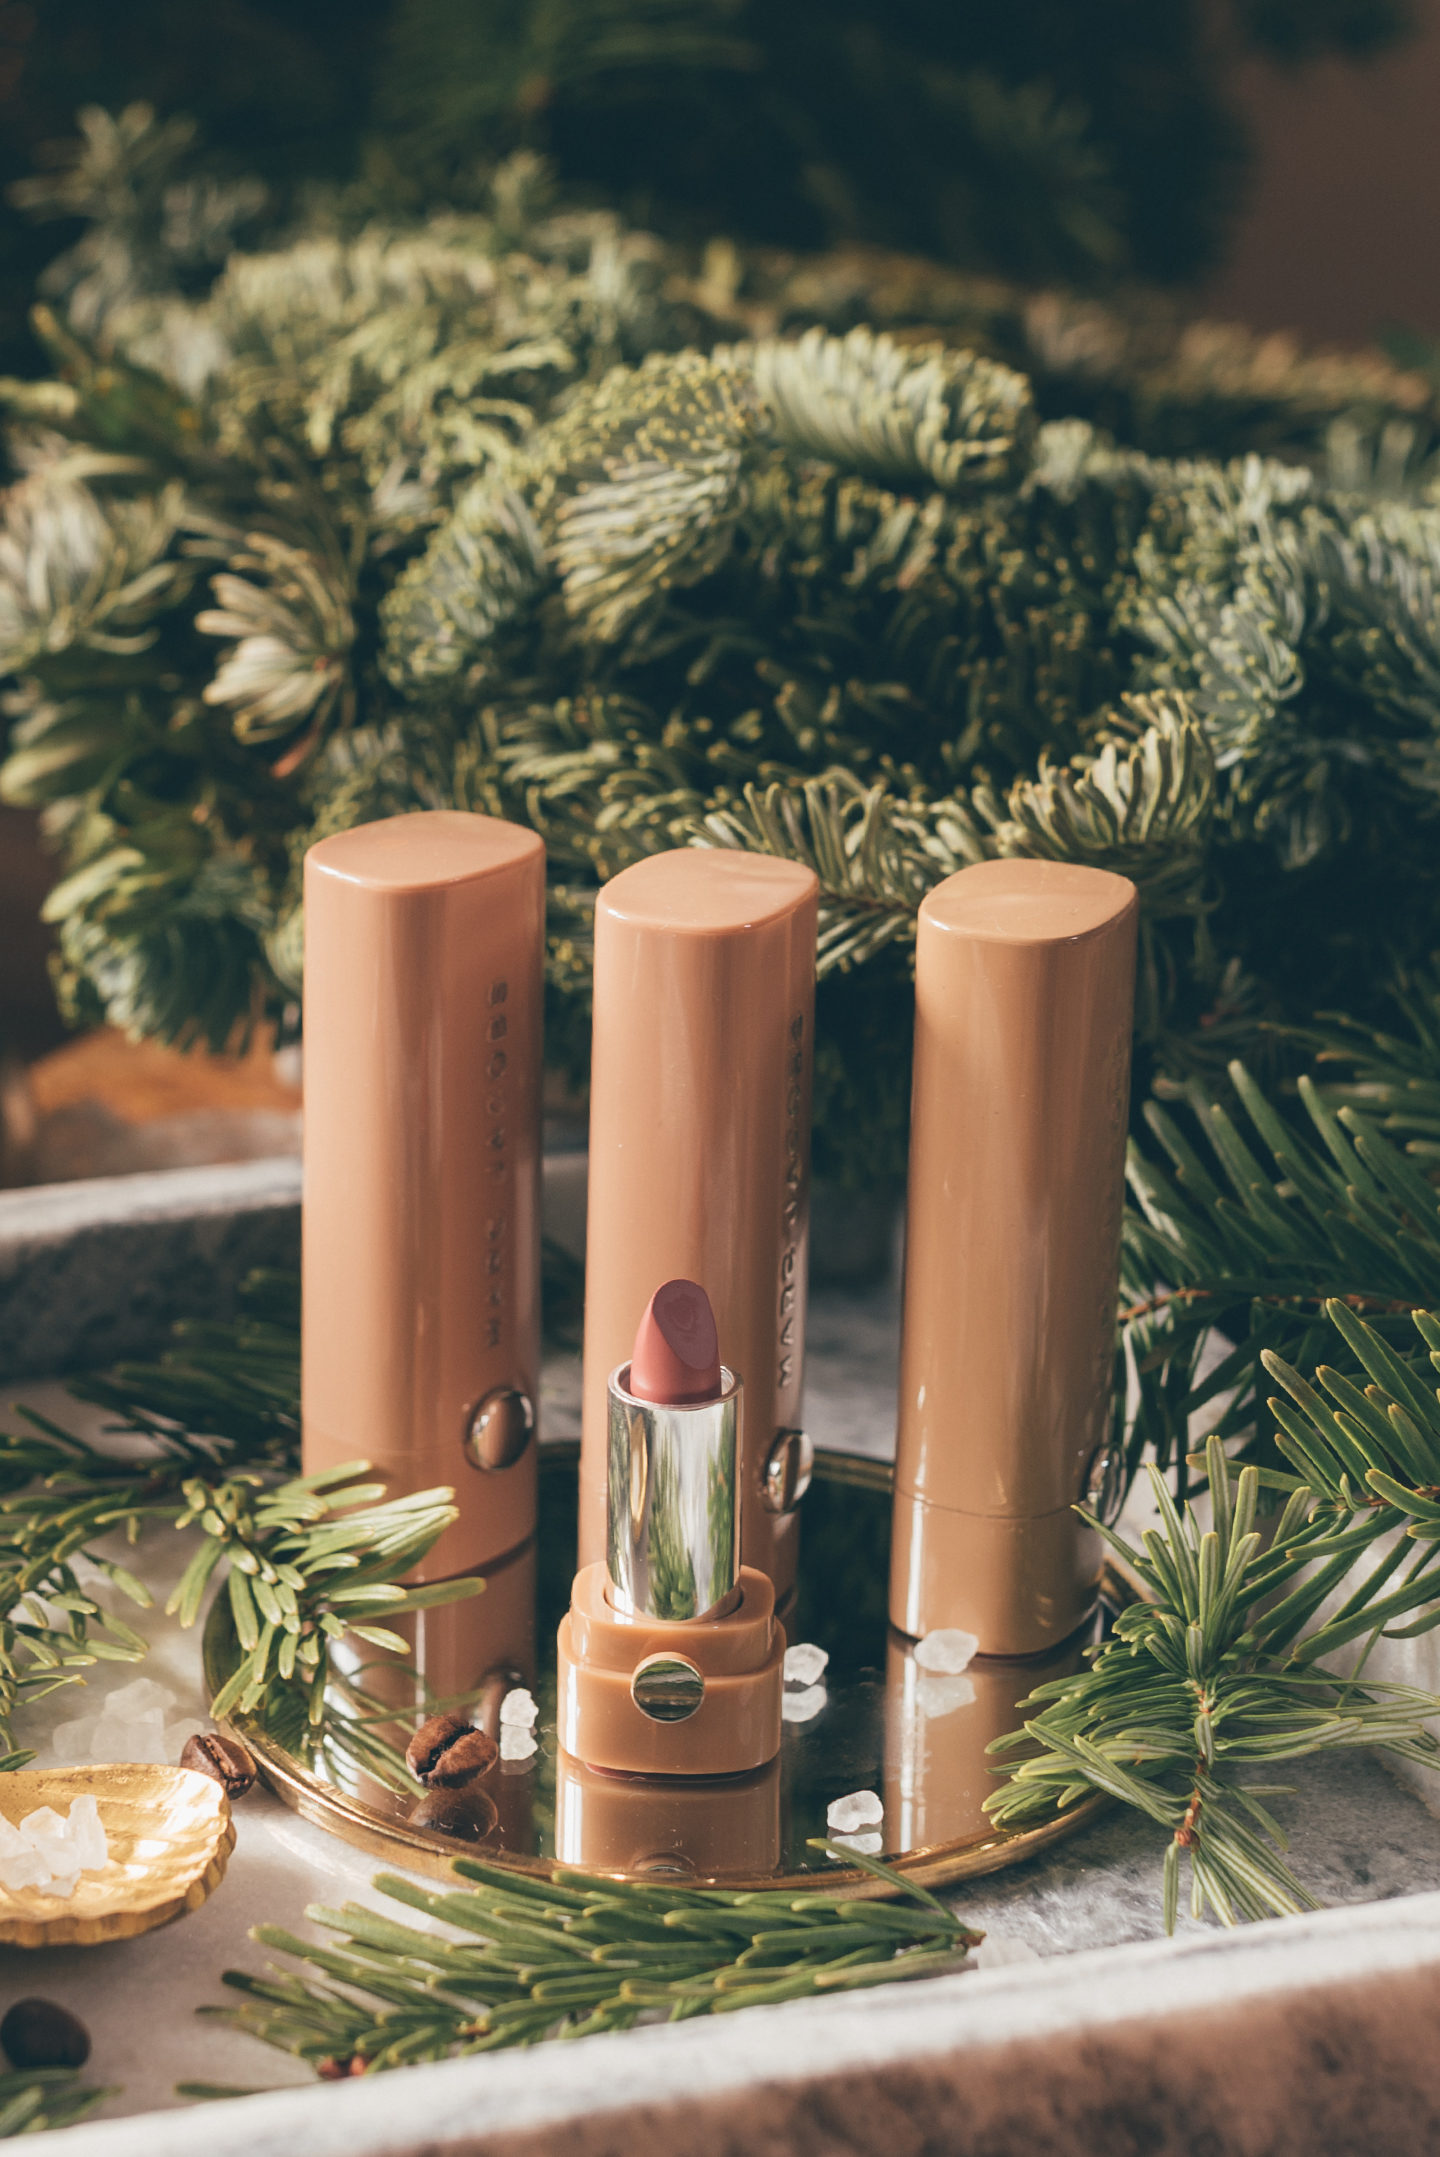 Gift Guide Cruelty Free Beauty Linda's Wholesome Life Marc Jacobs Beauty